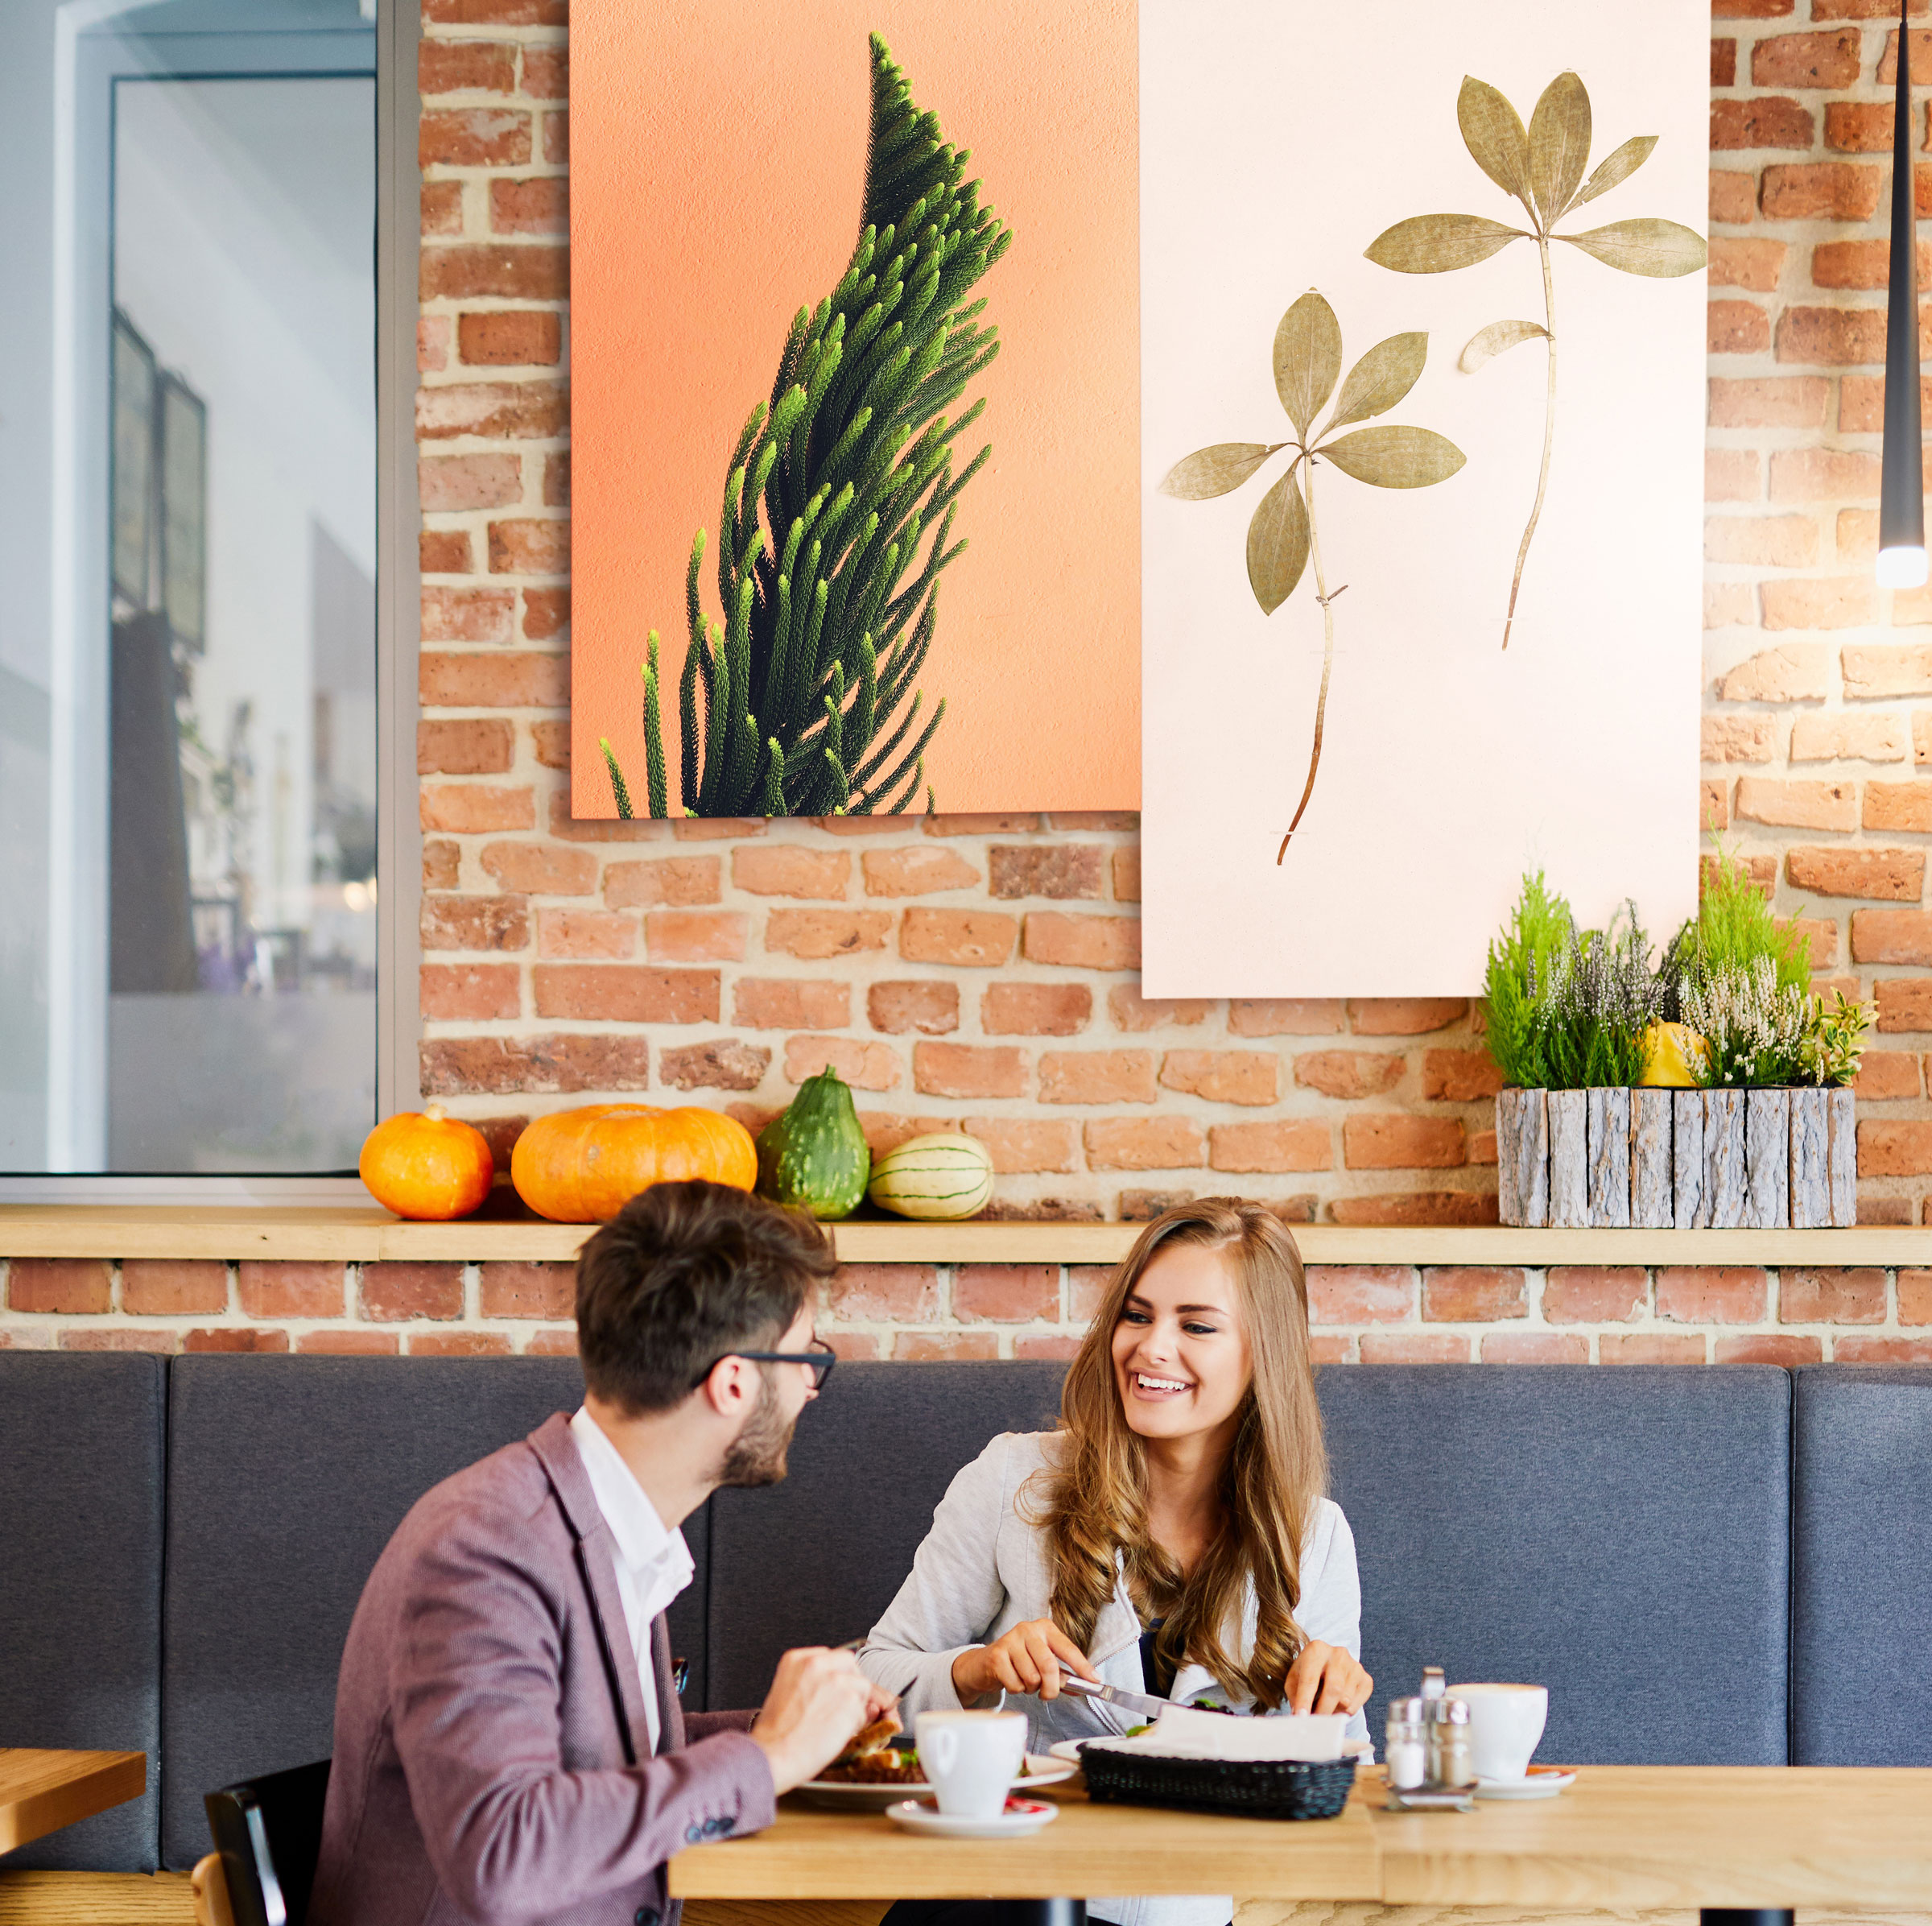 Man and woman sitting in cafe with custom painted acoustic panels hung on brick wall behind.